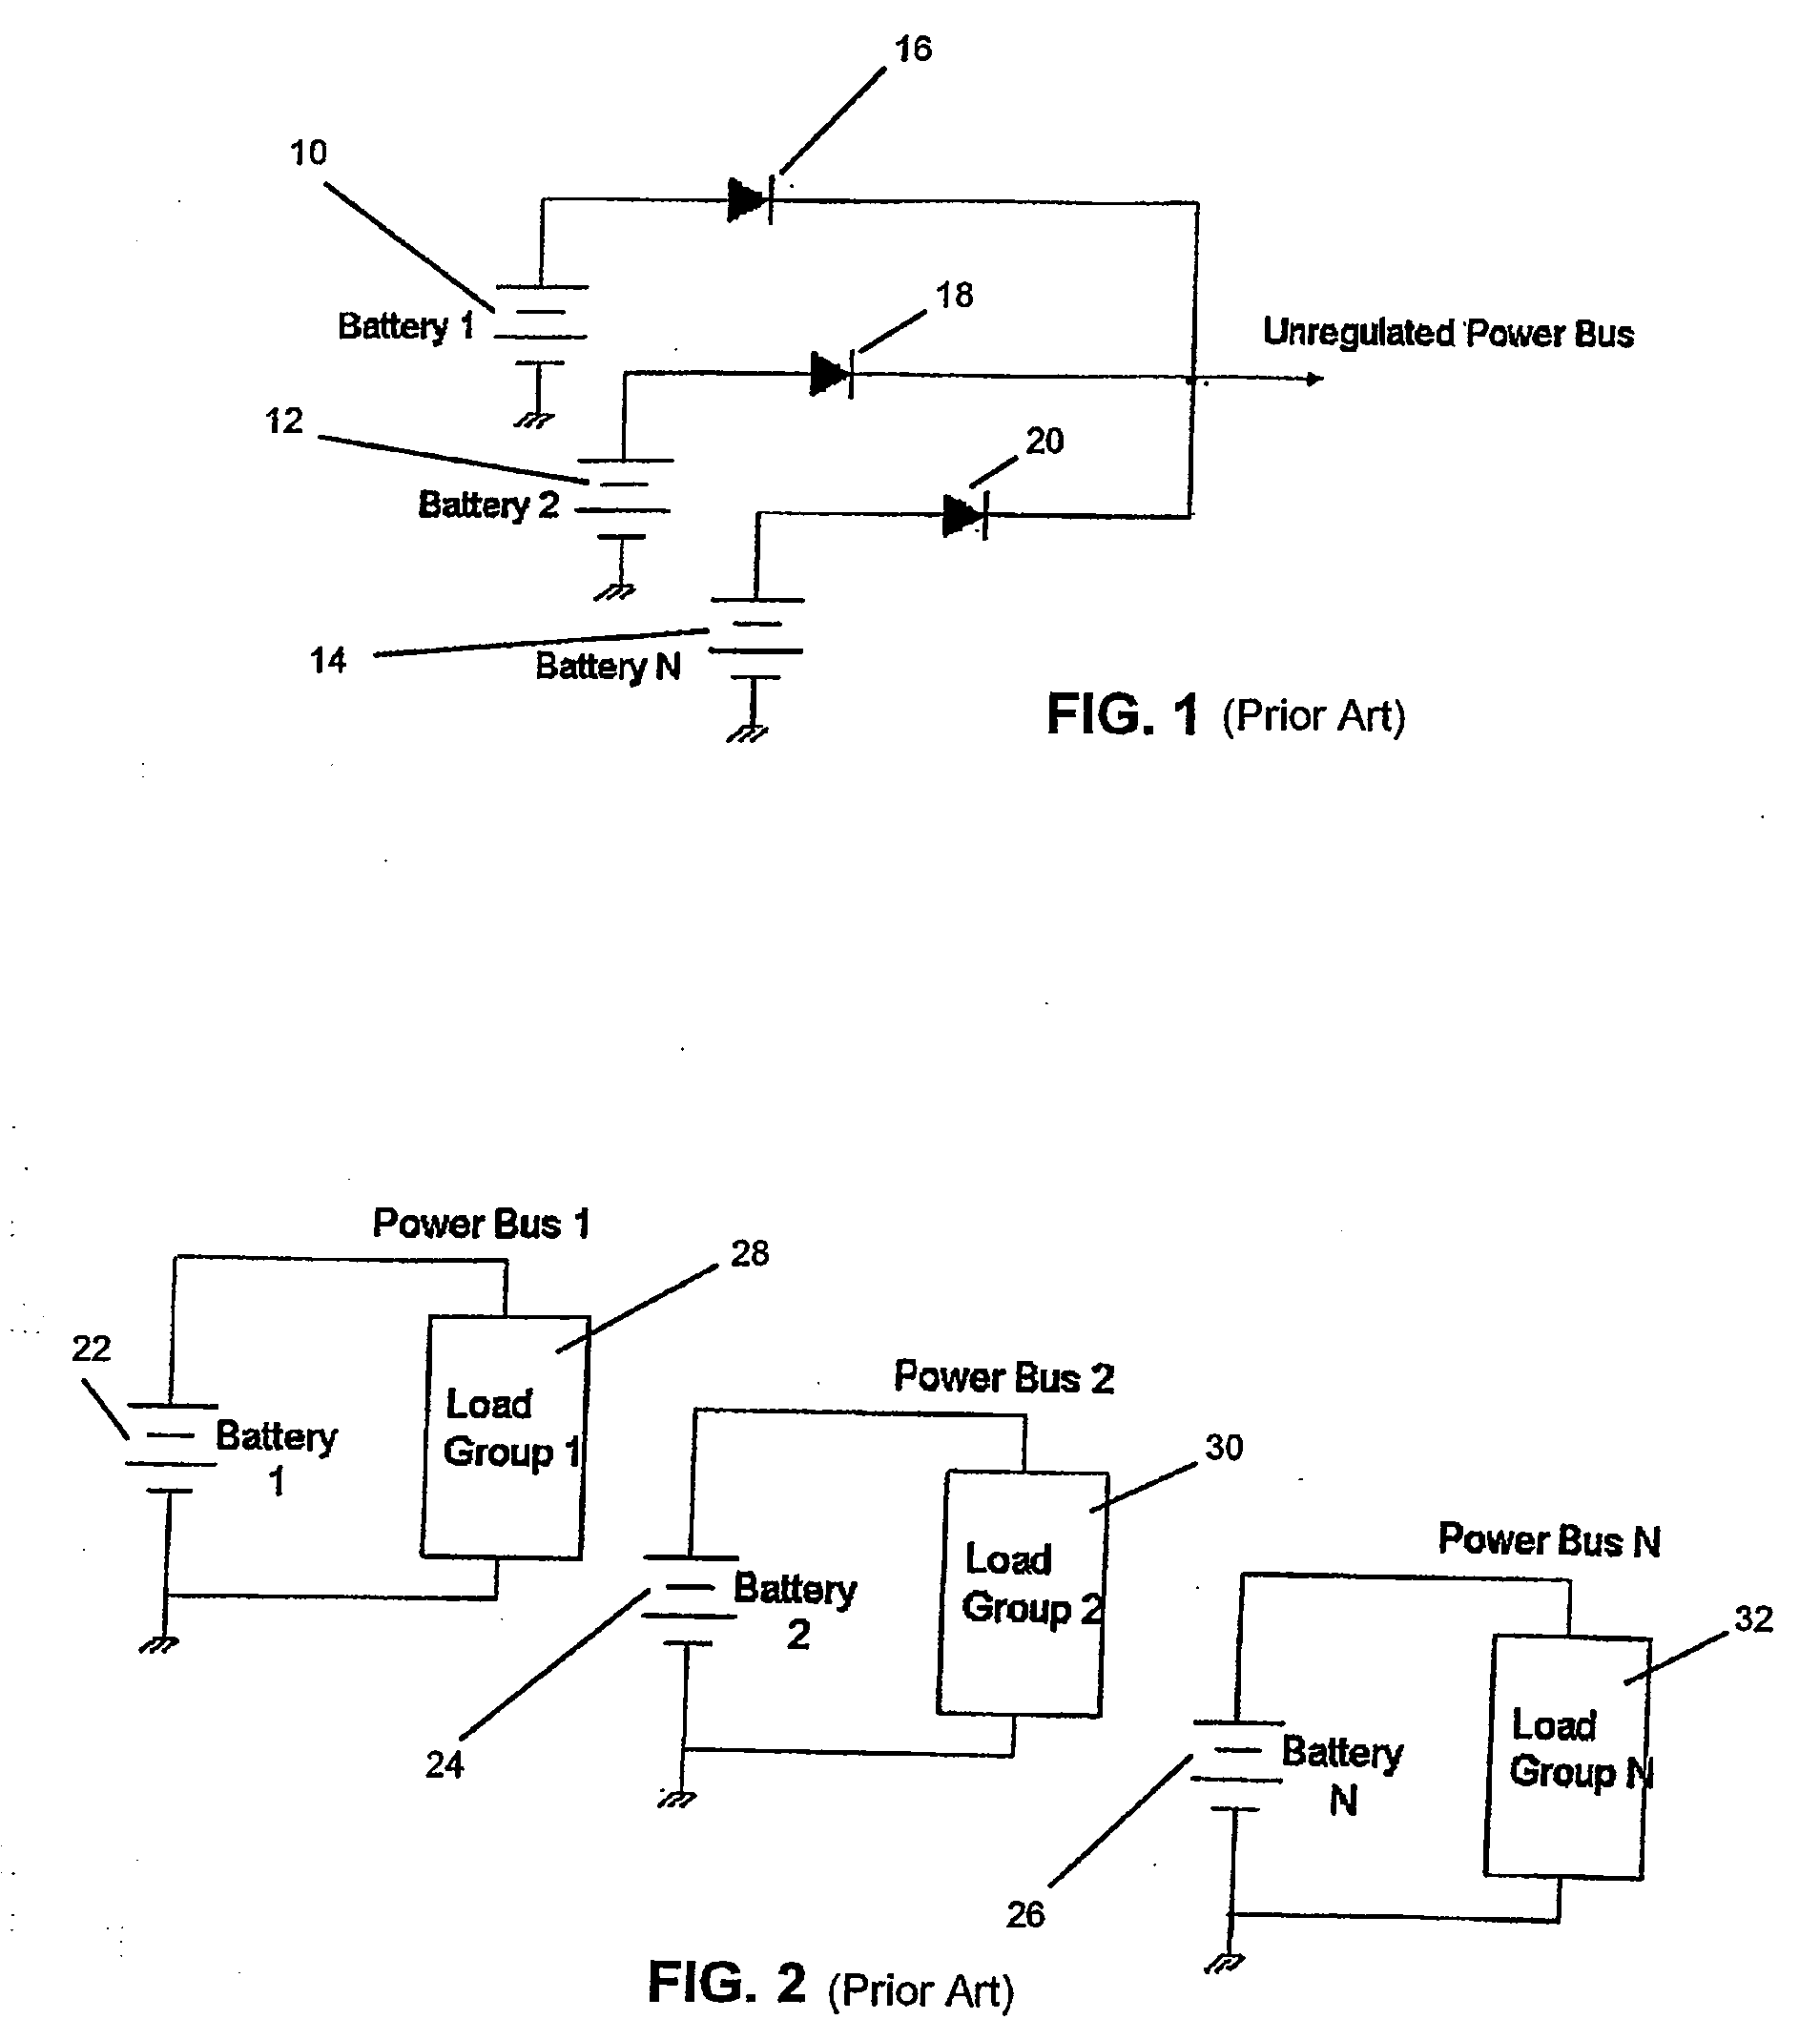 Battery discharge current sharing in a tightly regulated power system